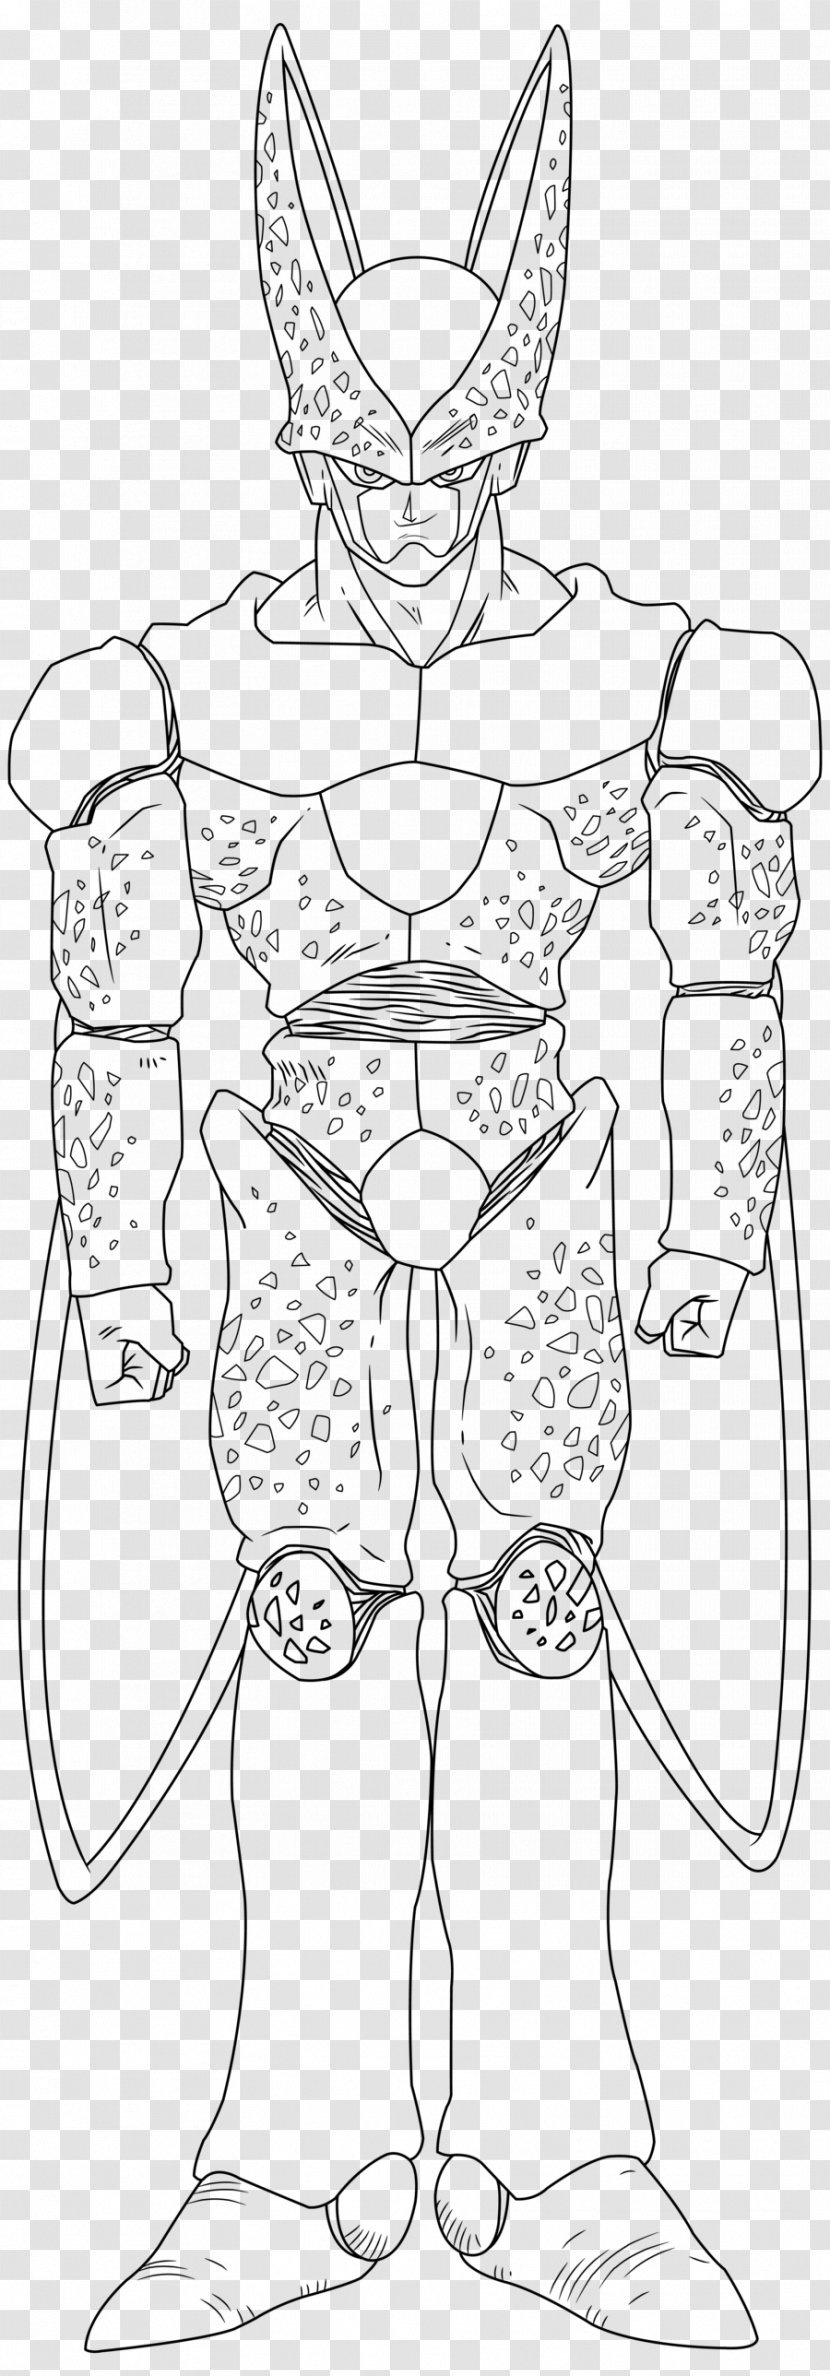 Line Art Drawing Cartoon Cell Frieza - Dragon Ball Z - David And Goliath Transparent PNG